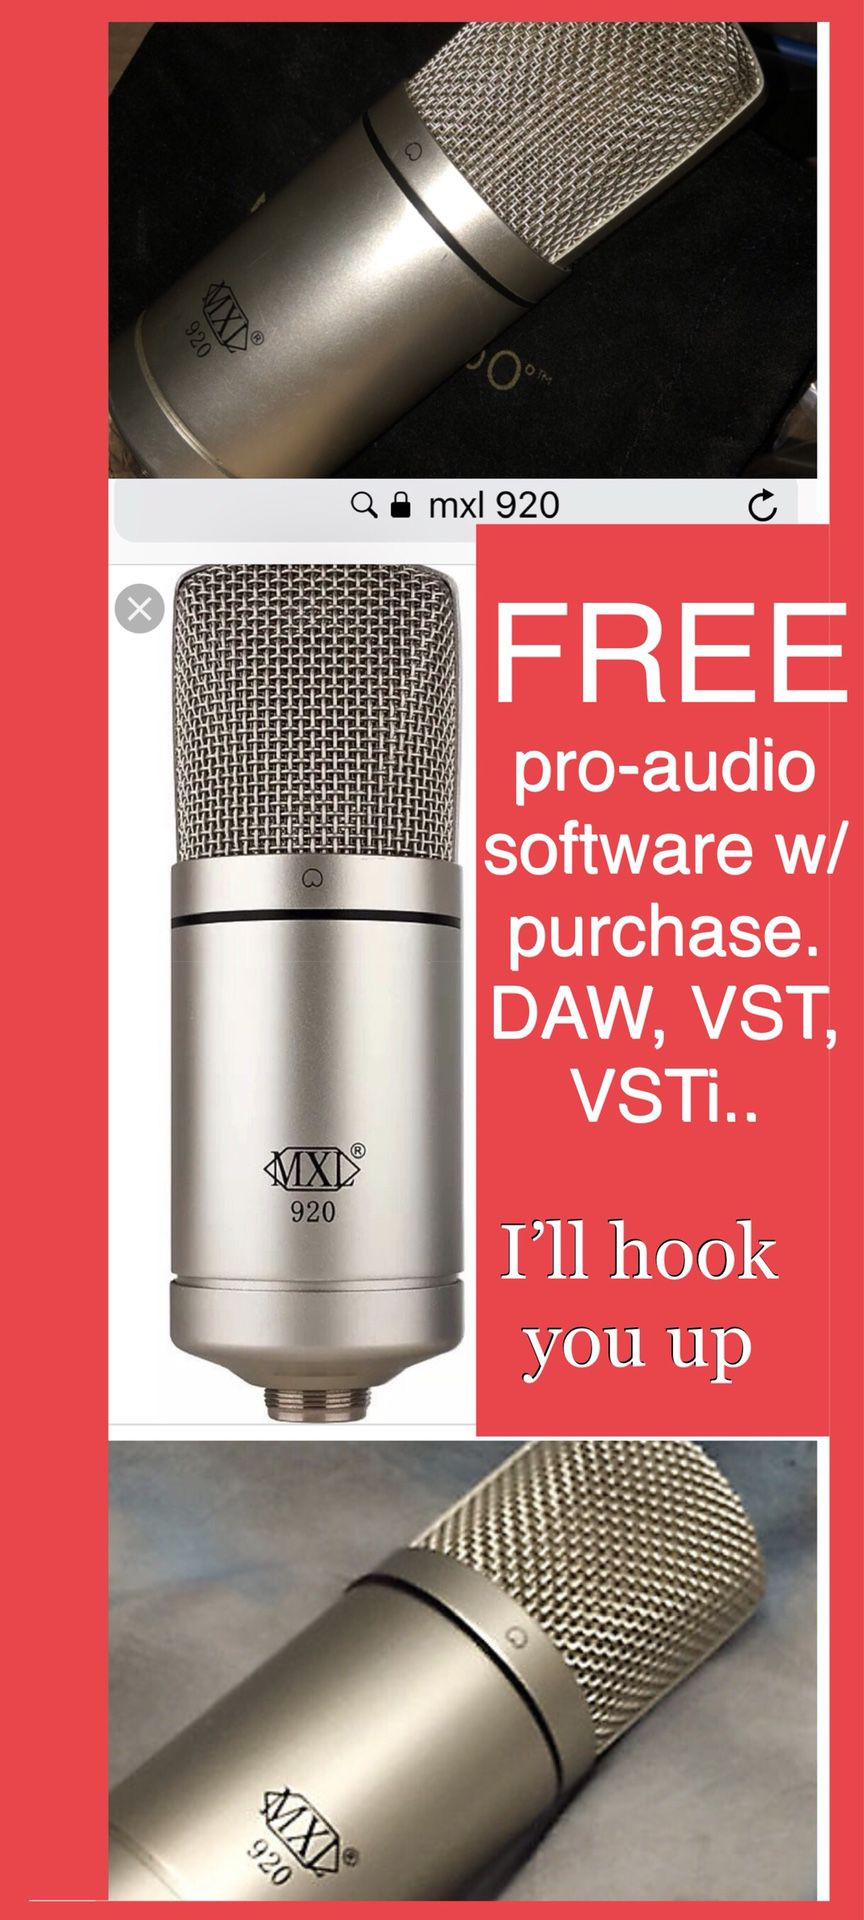 MXL 920 Pro Audio Studio Microphone MIC - cash or trade for Samsung Galaxy, iPhone, guitar, snap on tools or air compressor. READ AD for FREE software